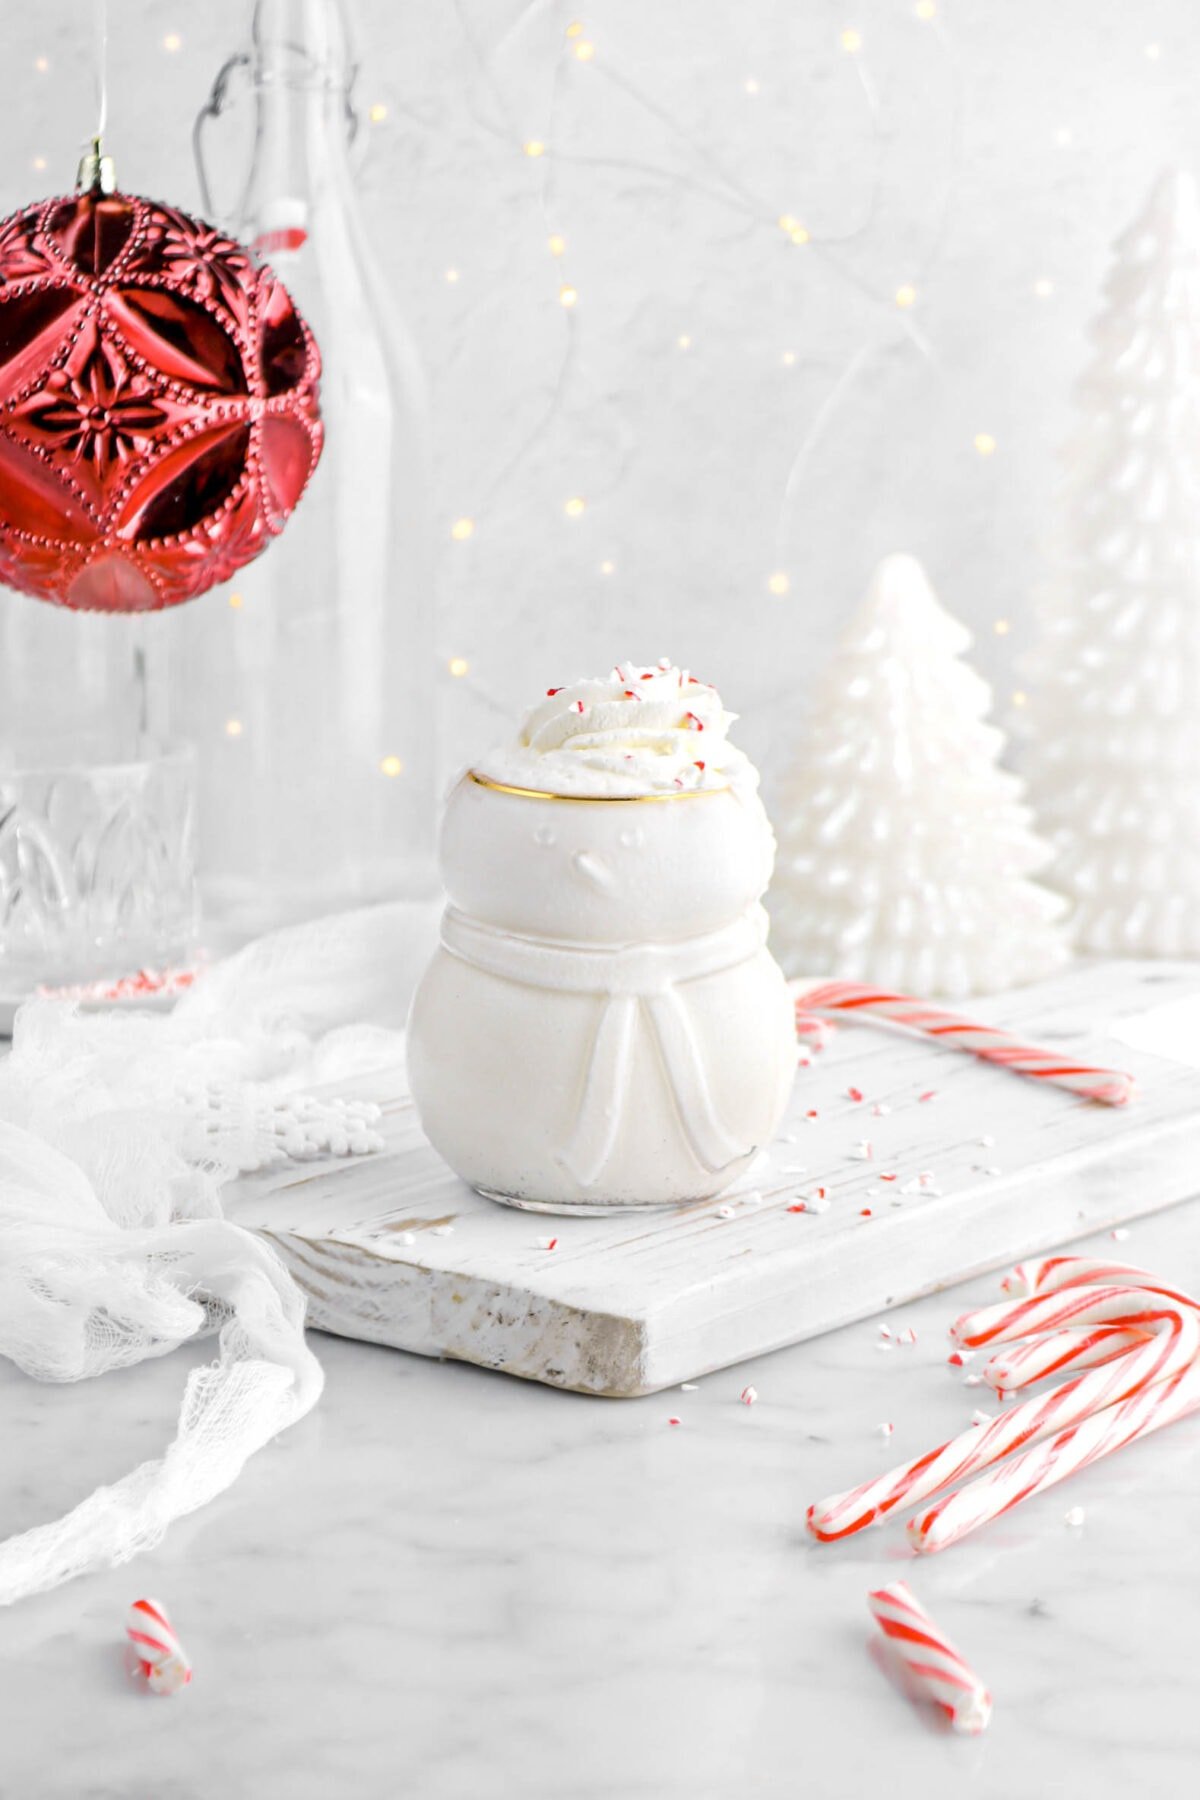 milkshake in snowman shaped glass on a wood board with candy canes and crushed peppermint around, a white cheesecloth beside, a large red ornament hanging behind with two white christmas trees.